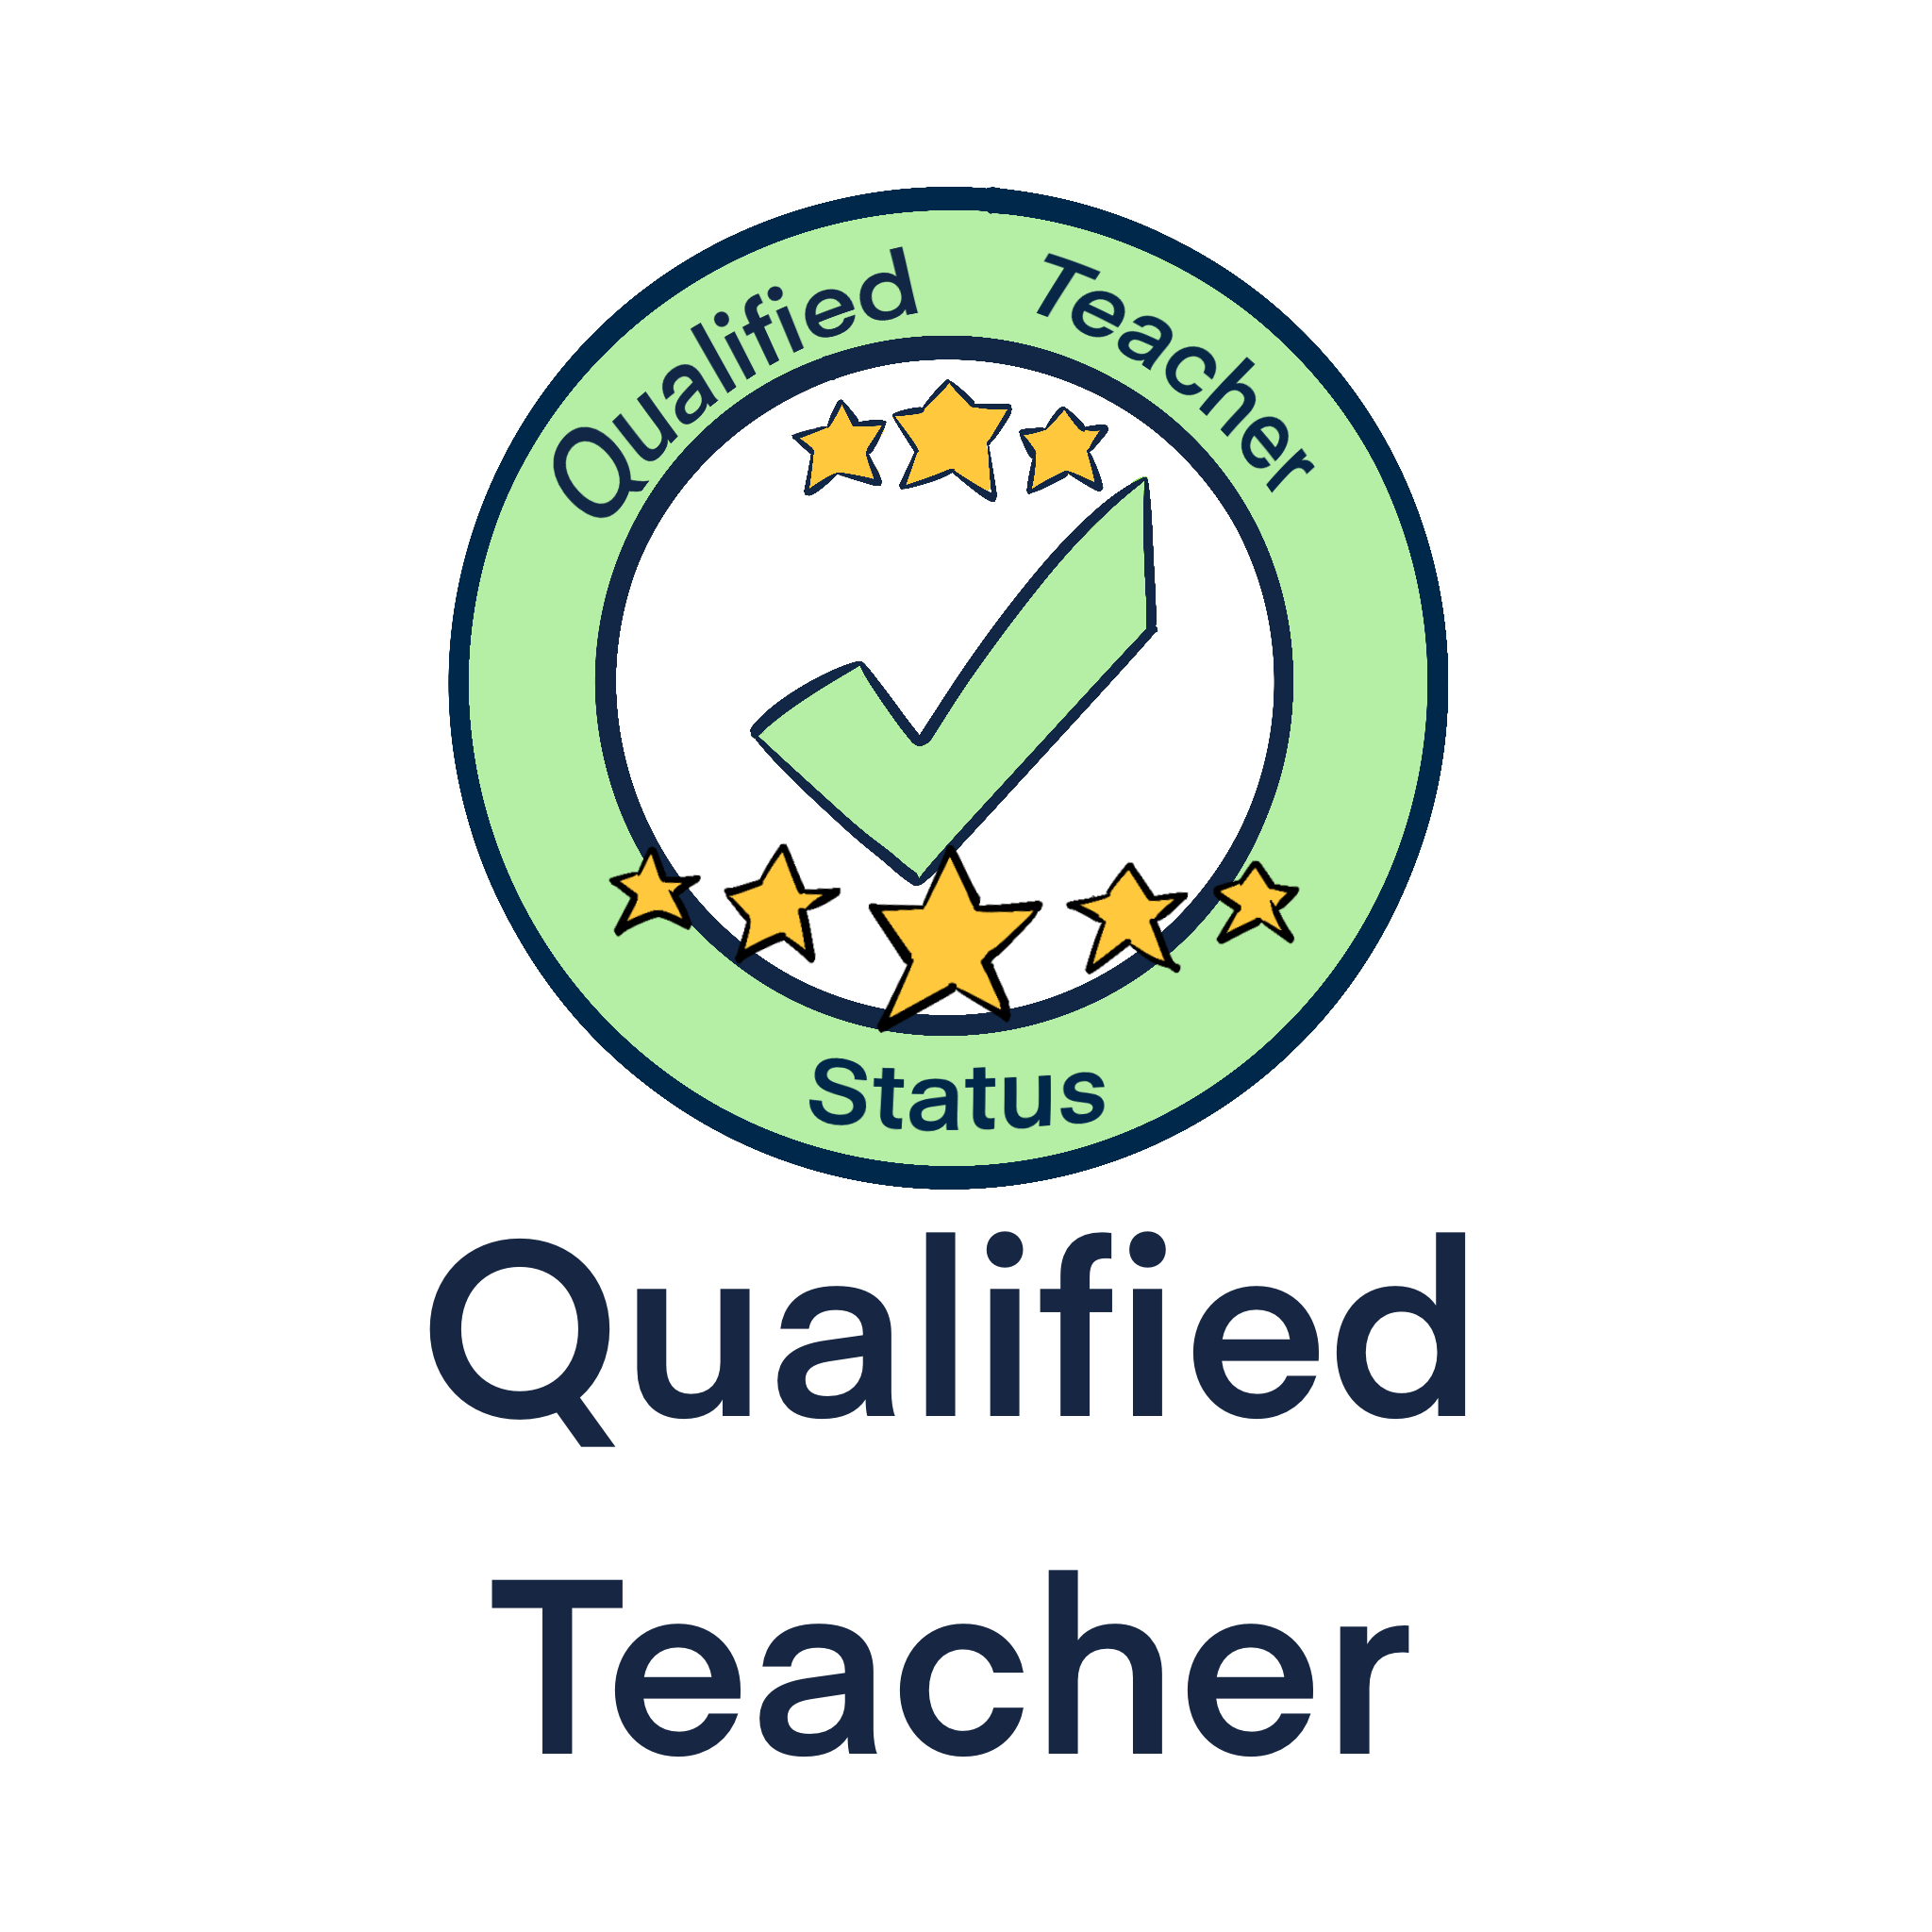 Like all our tutors, Claudia is a qualified teacher